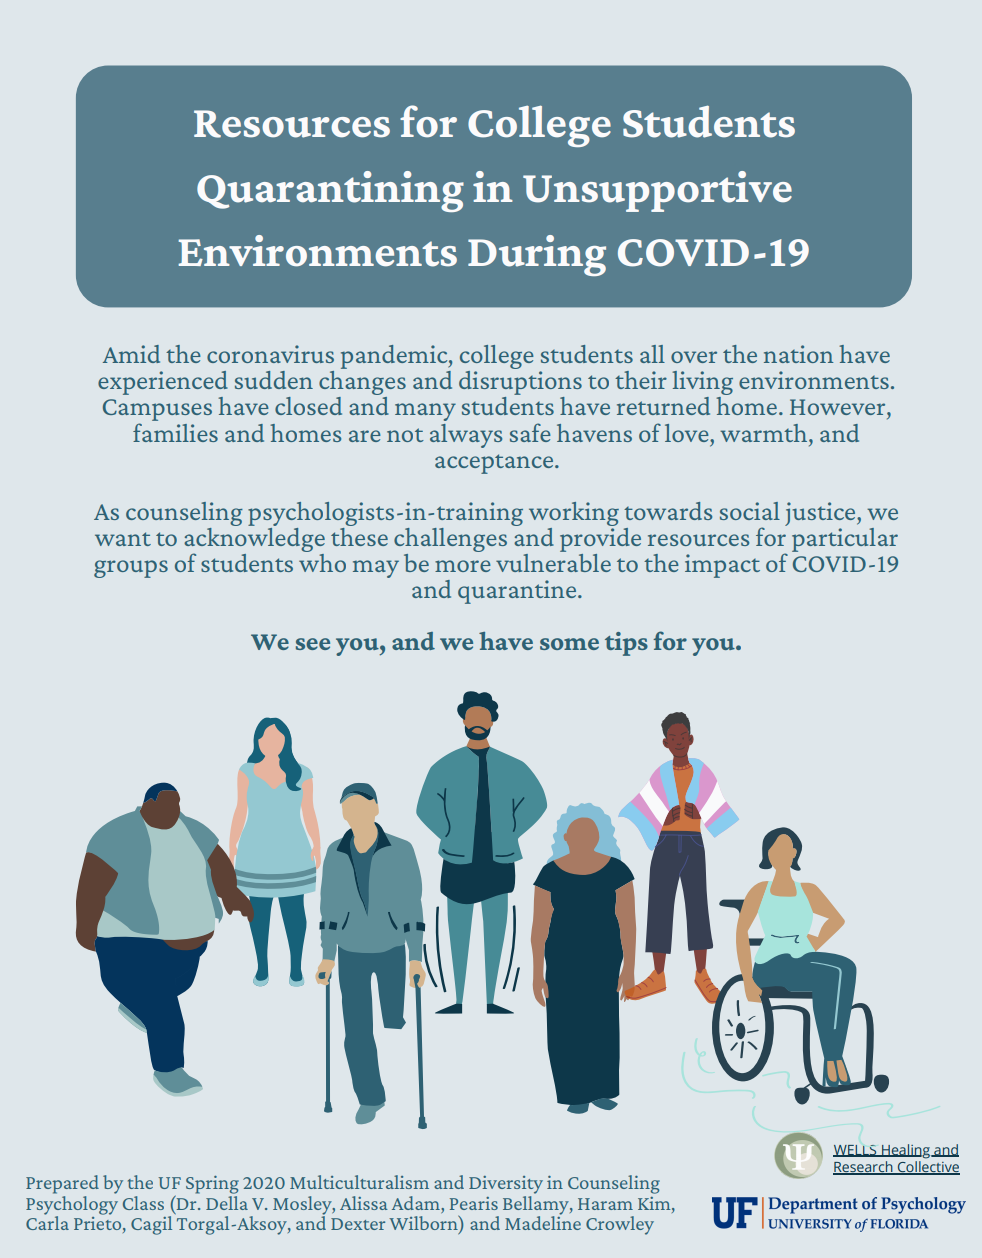 Resources for College Students Quarantining in Unsupportive Environments during COVID-19